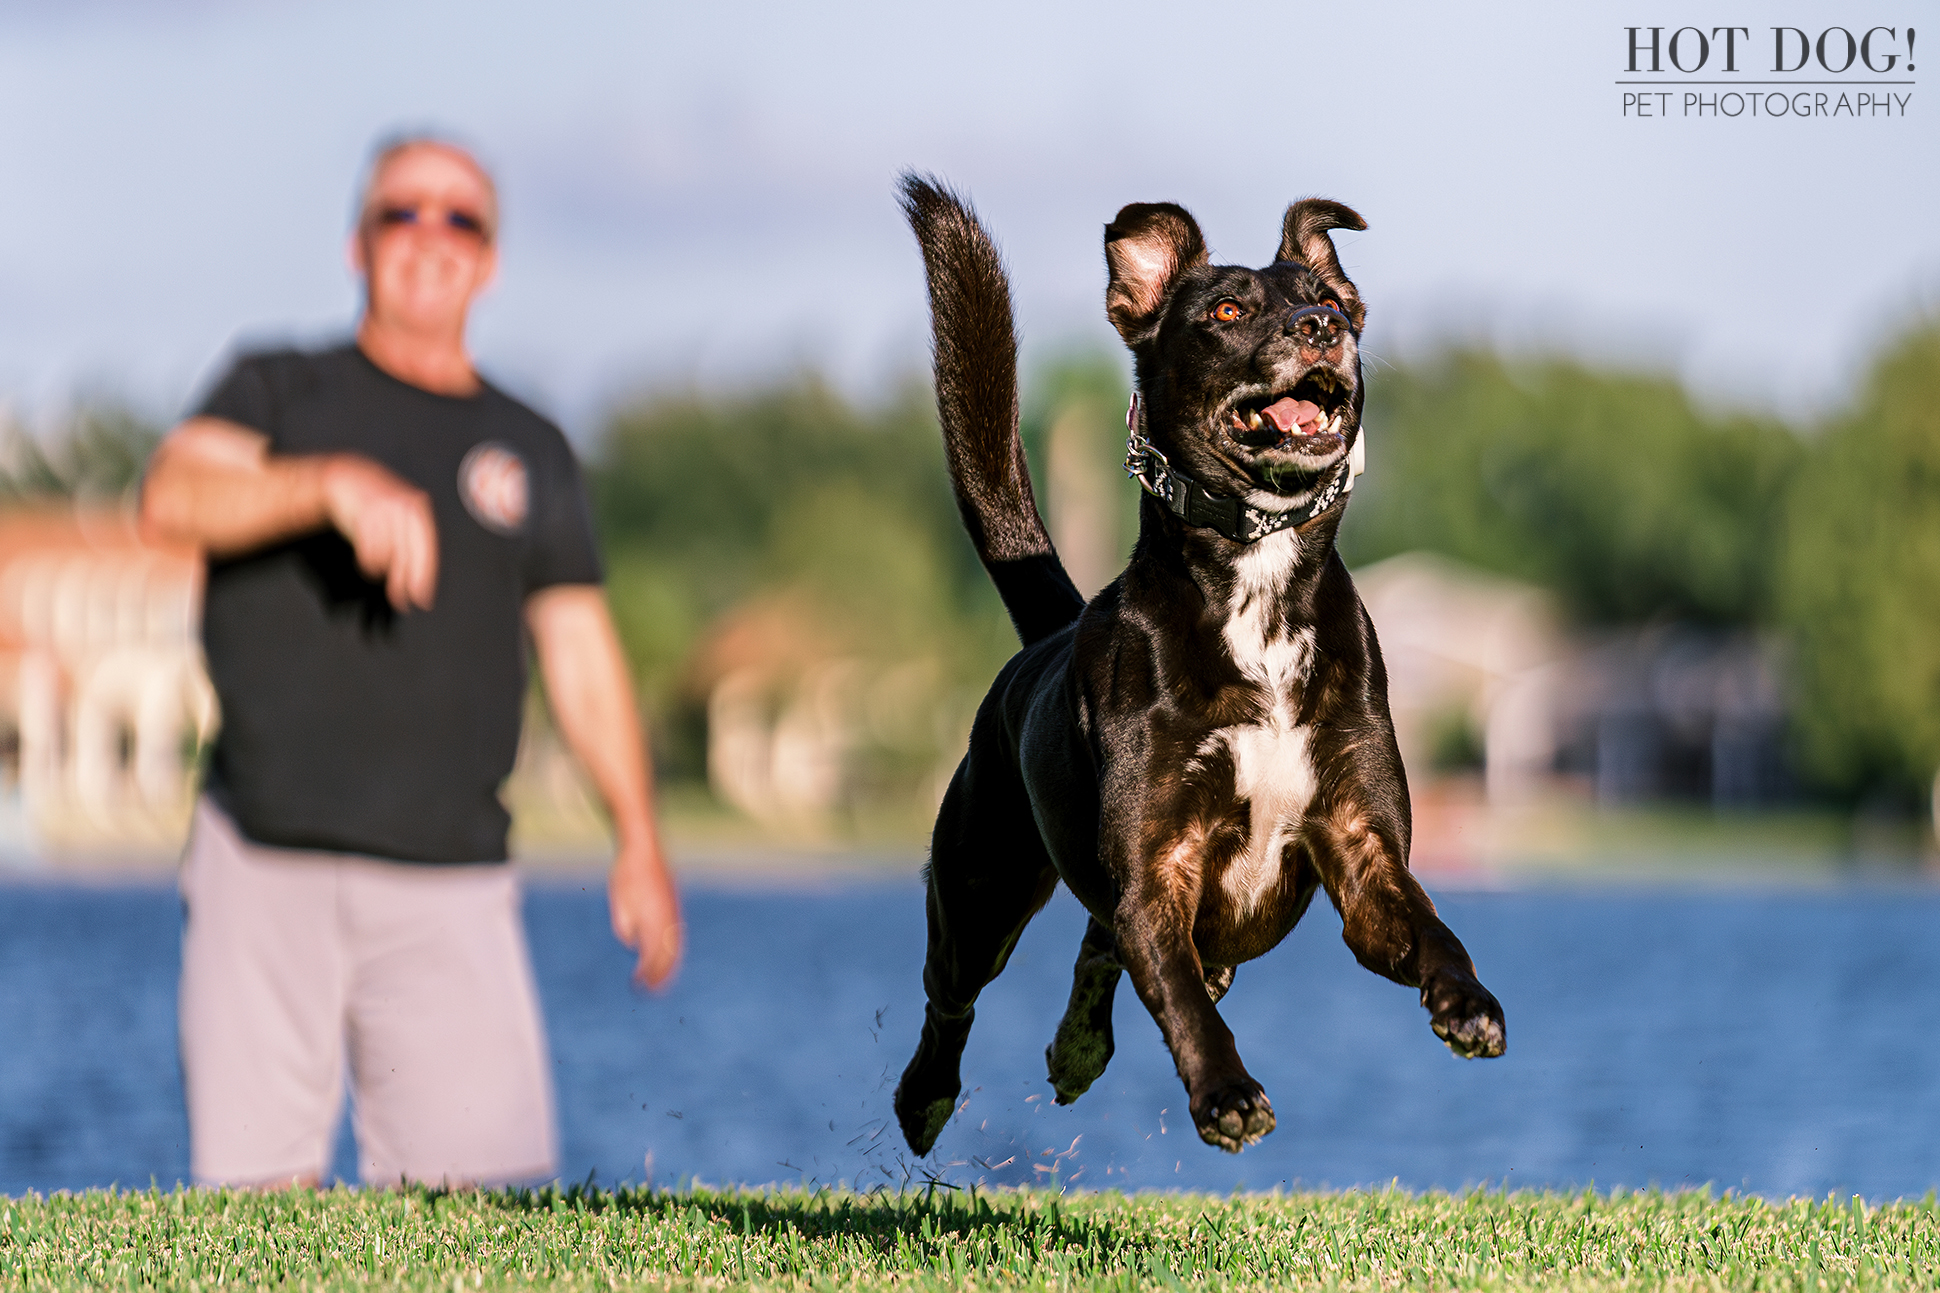 Mixed breed dog named Roxie chasing a ball in College Park, Florida. Photo by Central Florida pet photographer Hot Dog! Pet Photography